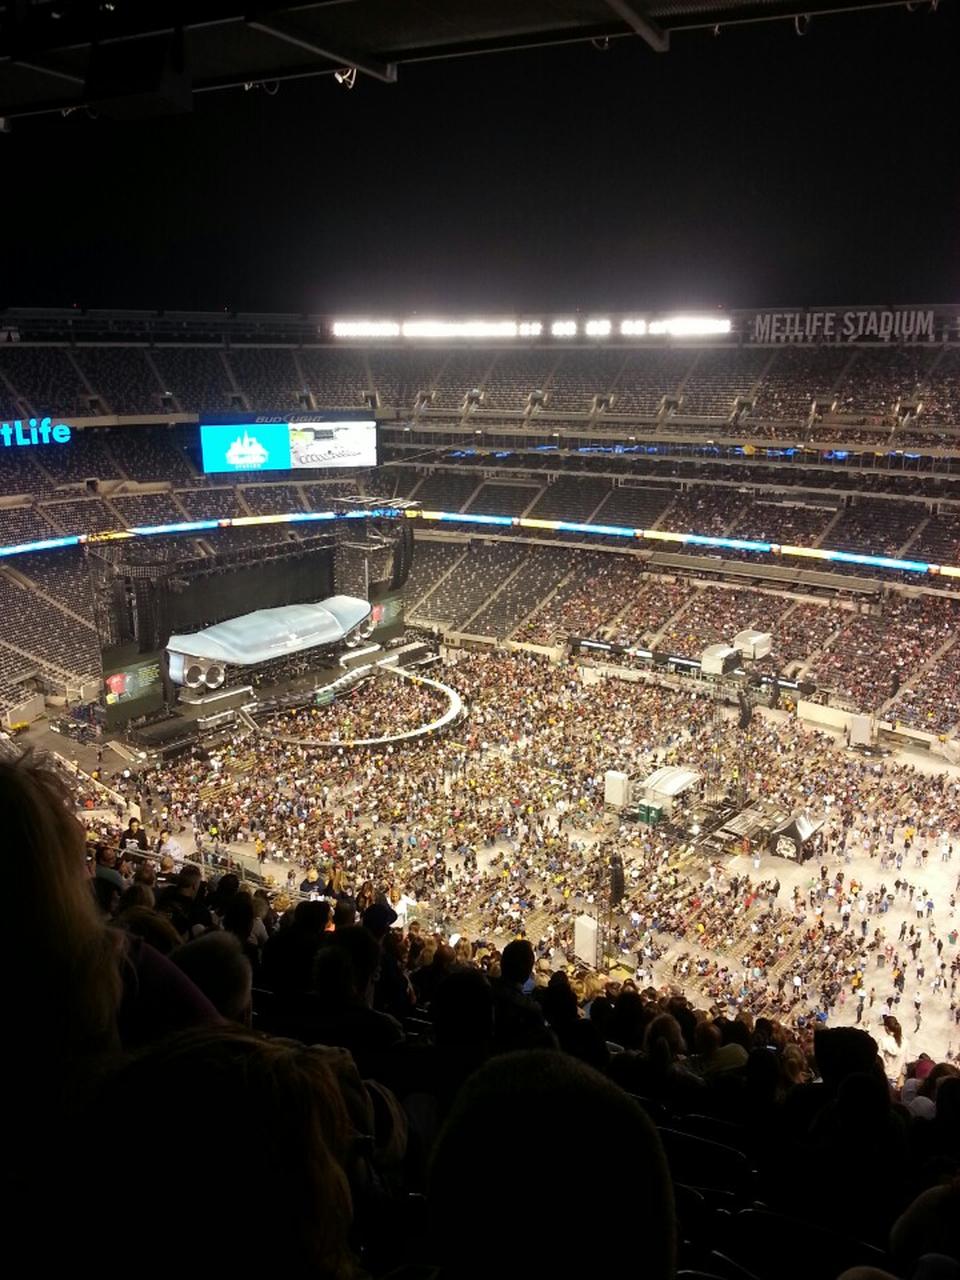 section 335, row 25 seat view  for concert - metlife stadium